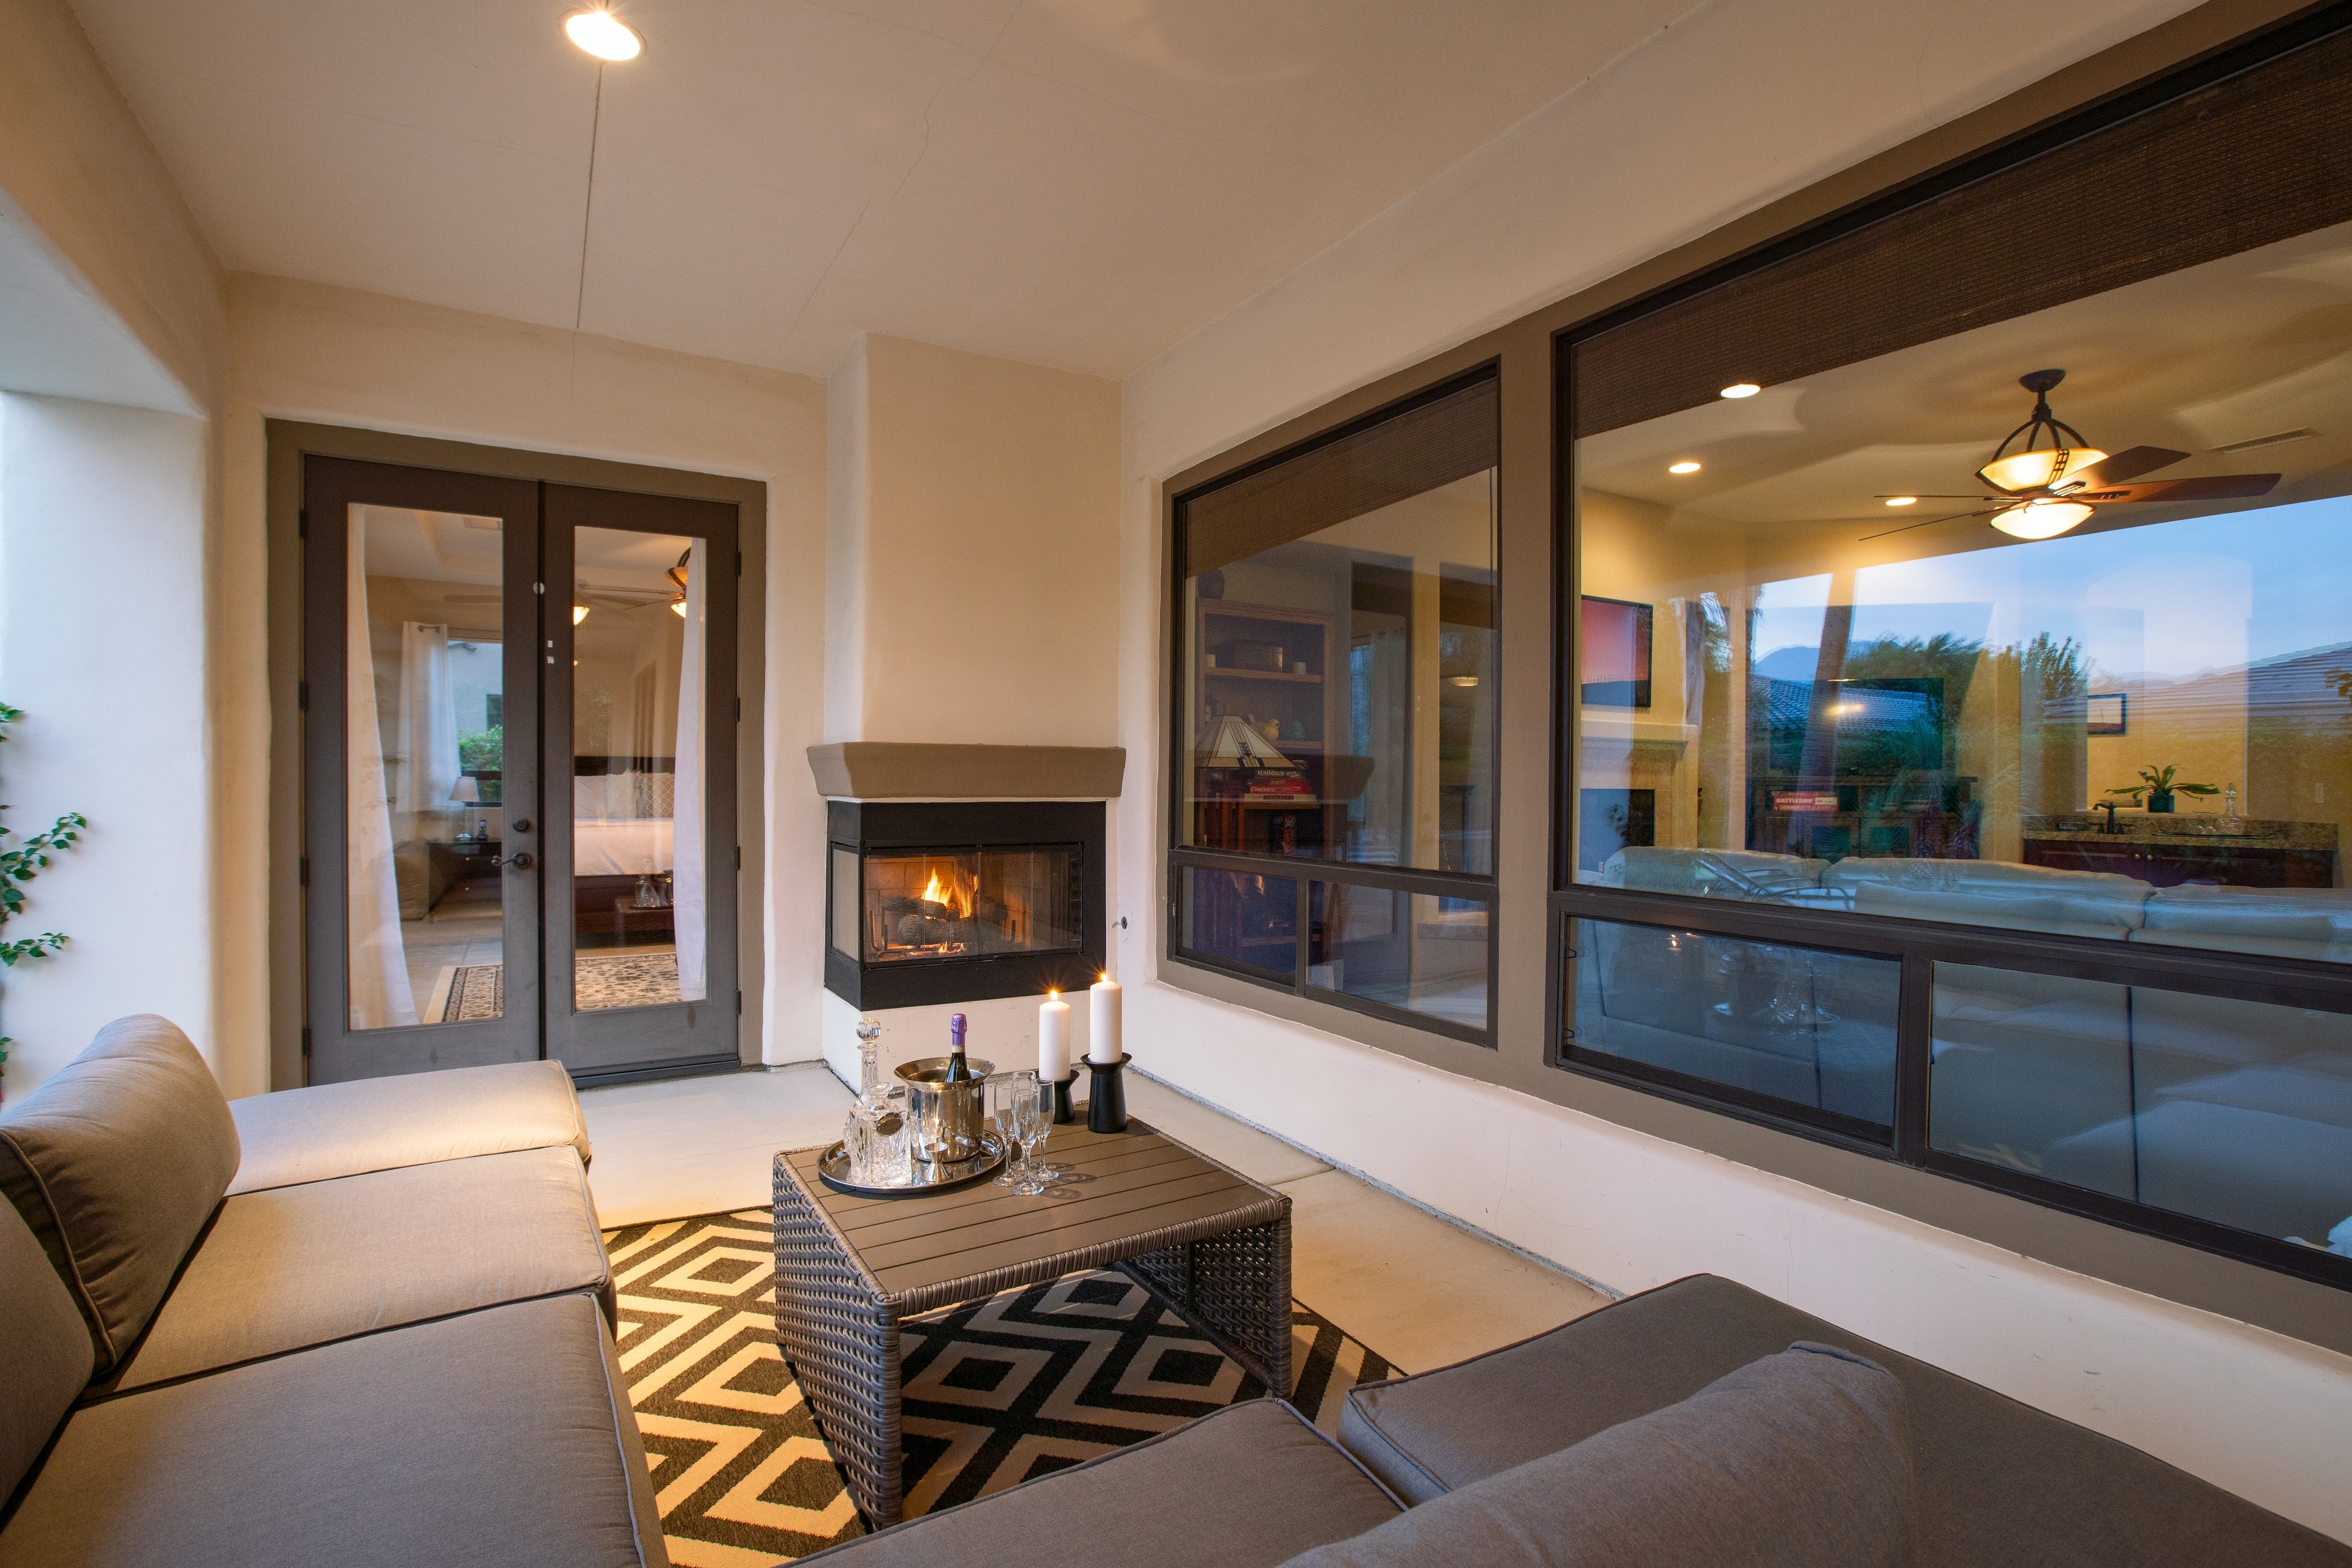 The outdoor lounge area is perfect for a drink by the fire.